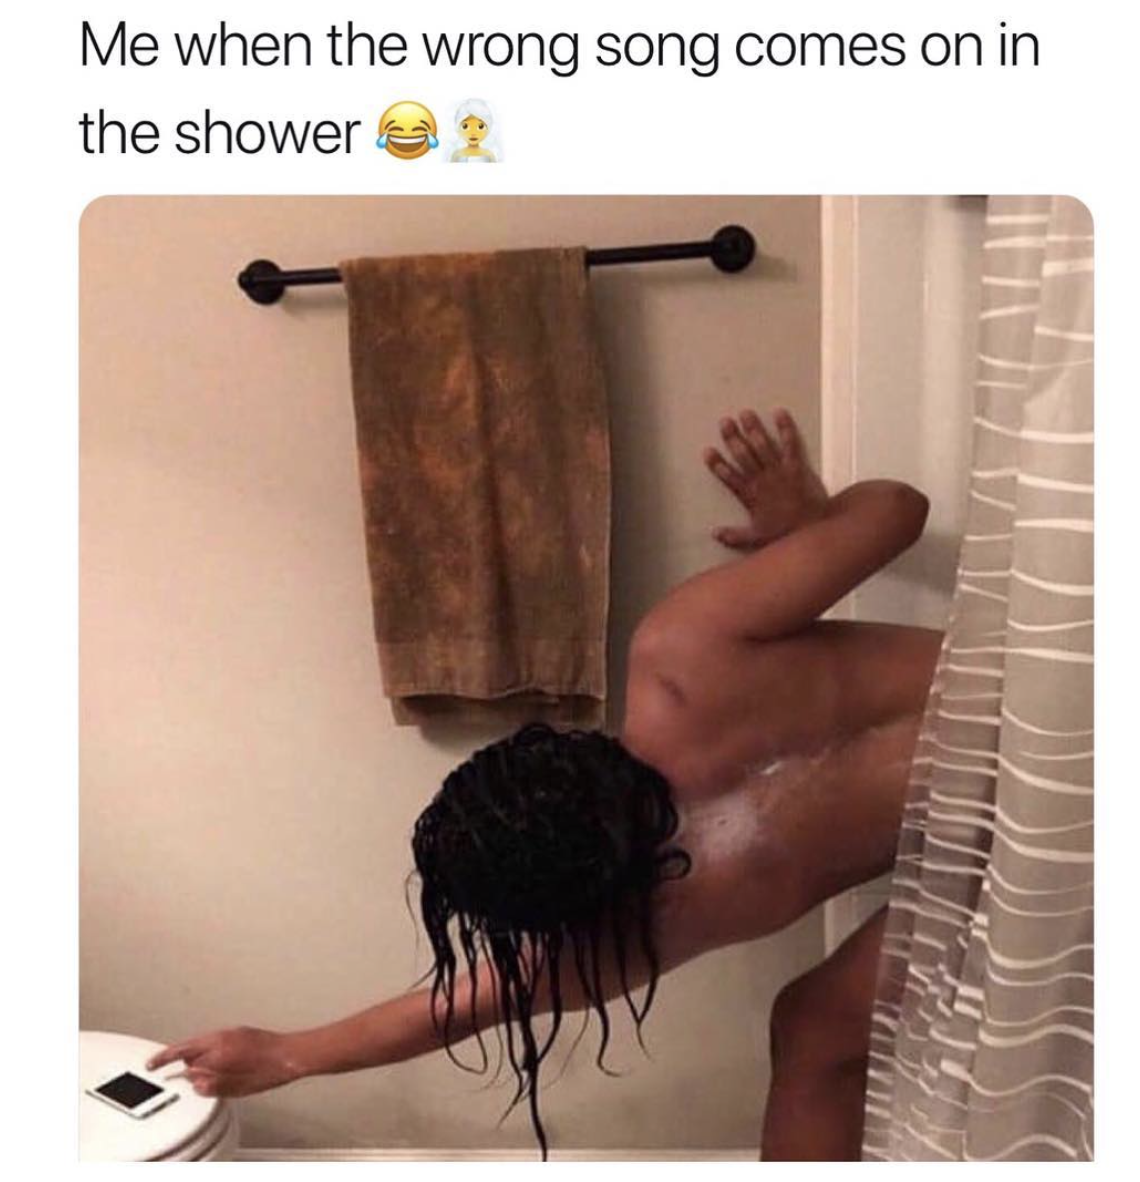 memes - me when the wrong song comes - Me when the wrong song comes on in the shower